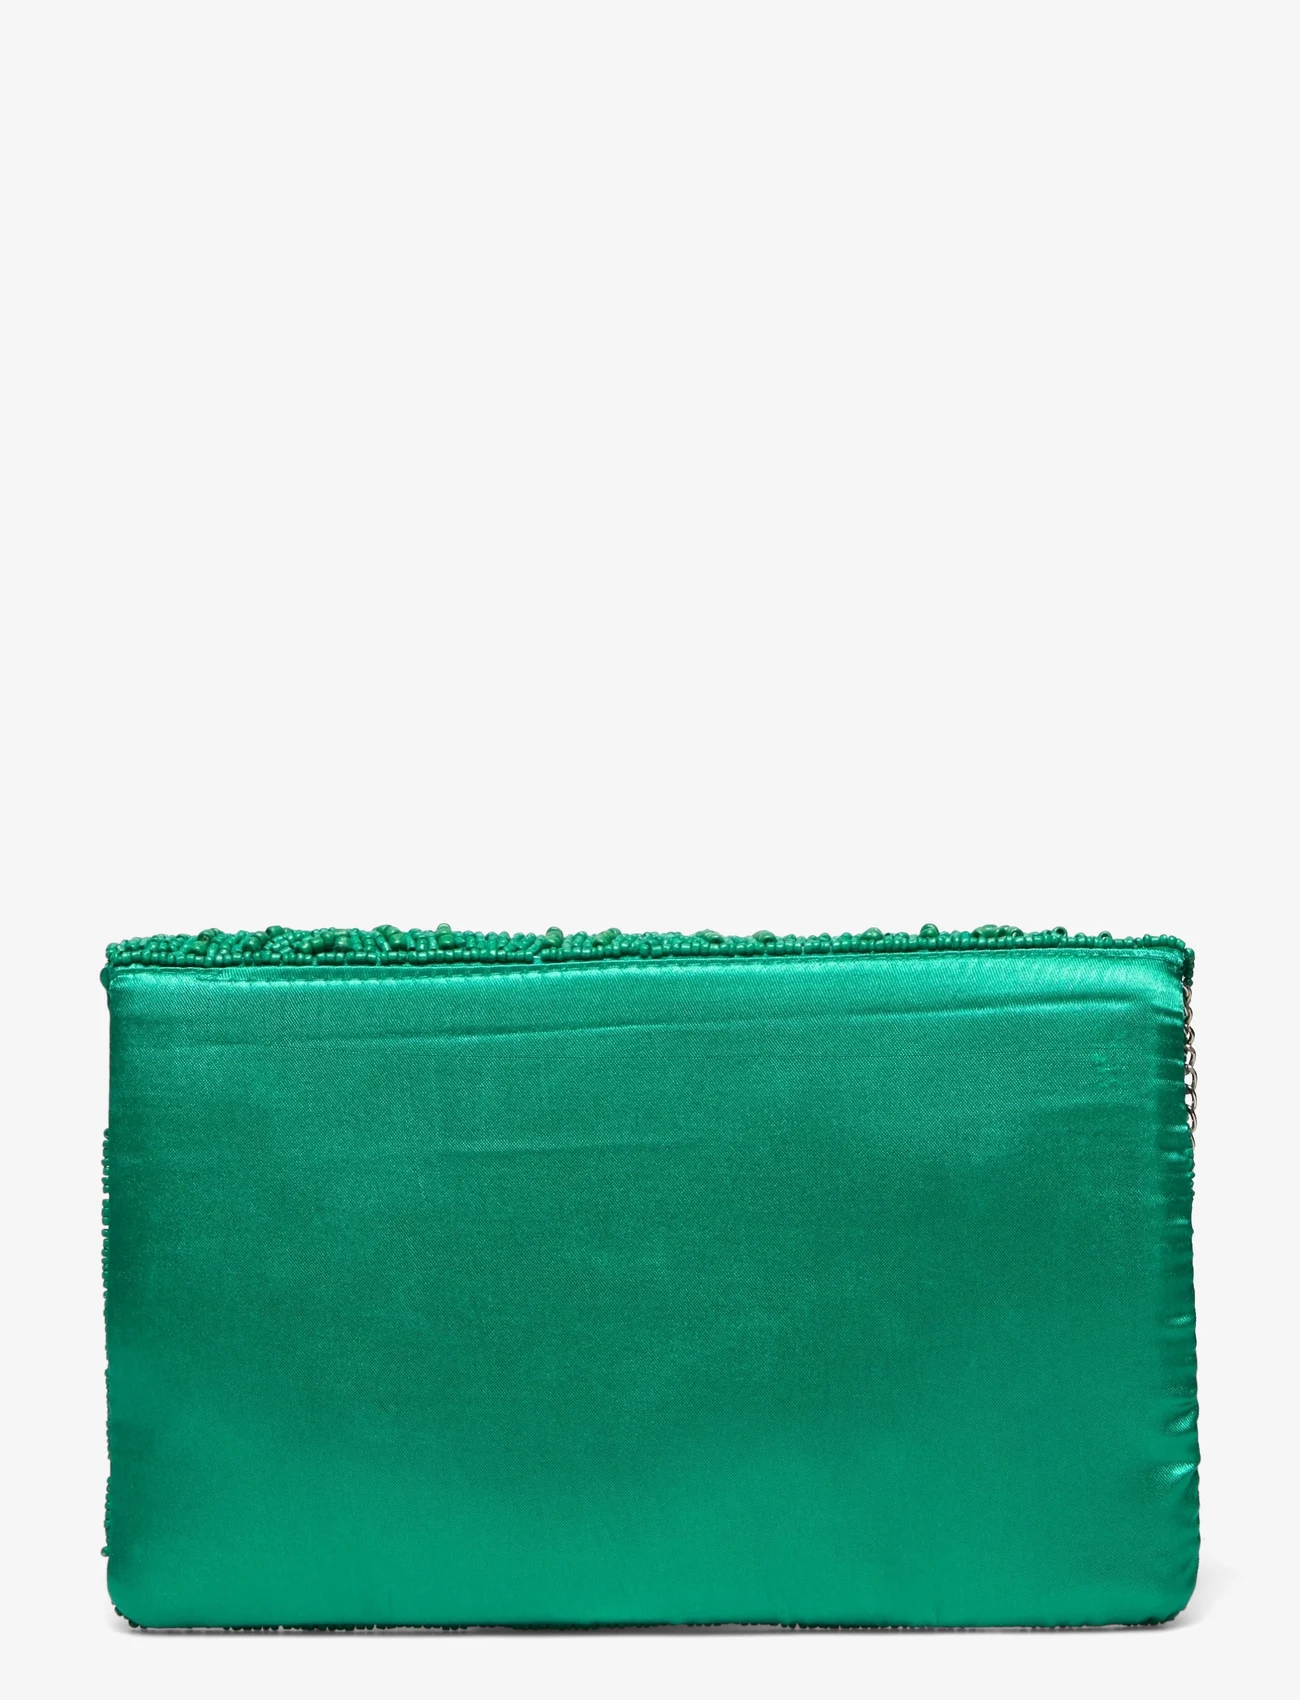 Pipol's Bazaar - Casablanca Green Clutch Bag - party wear at outlet prices - green - 1